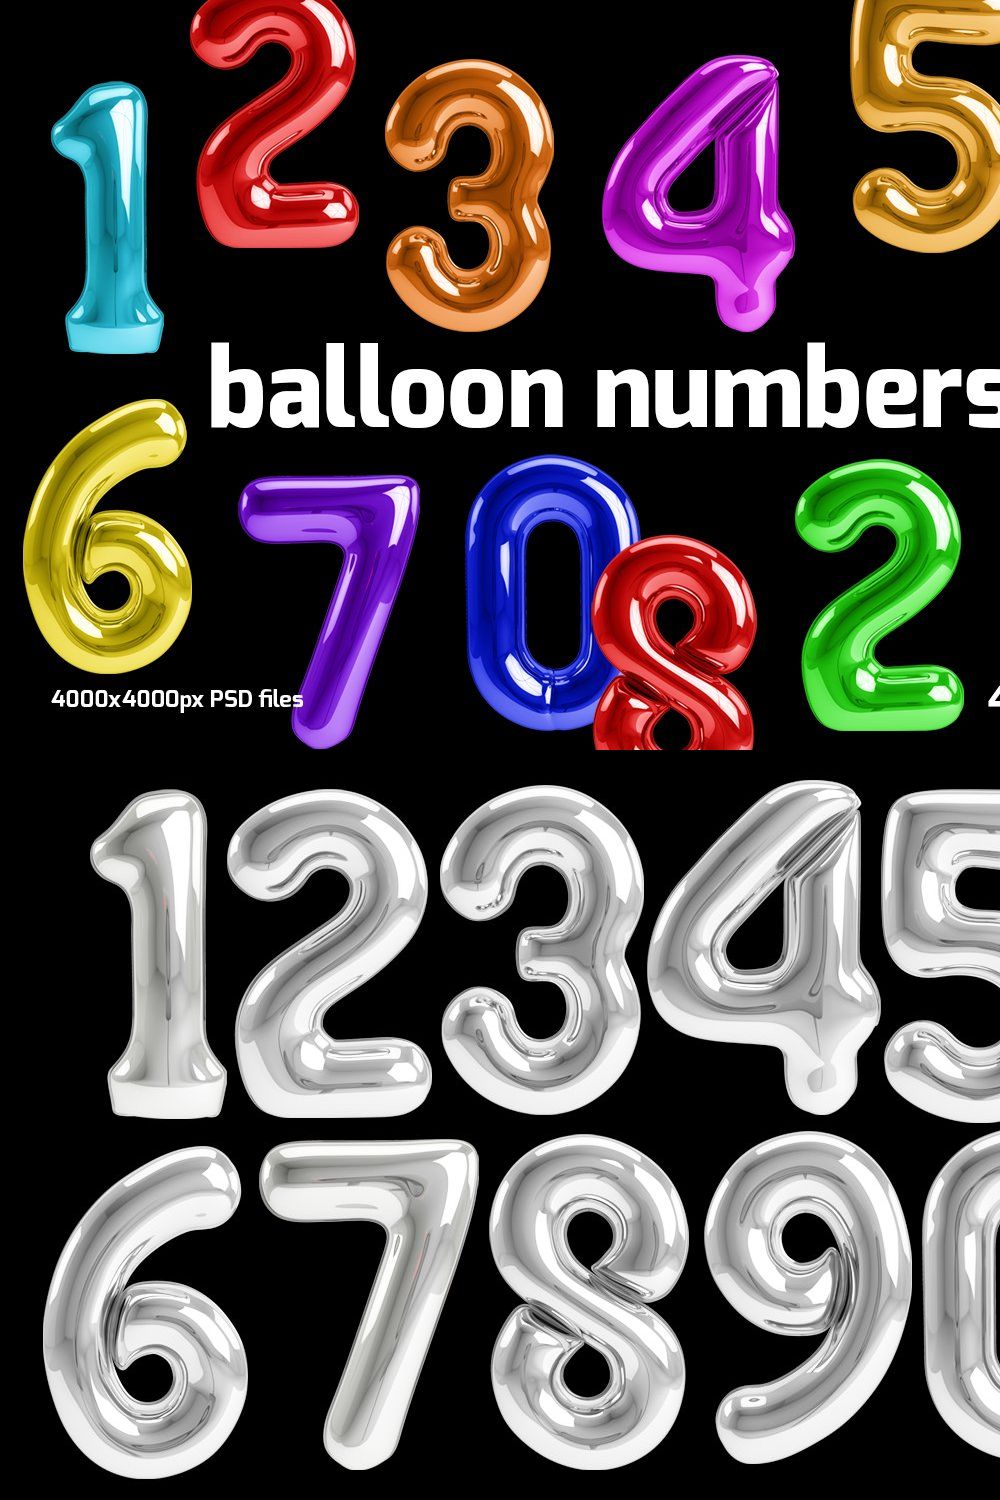 Balloon numbers pinterest preview image.